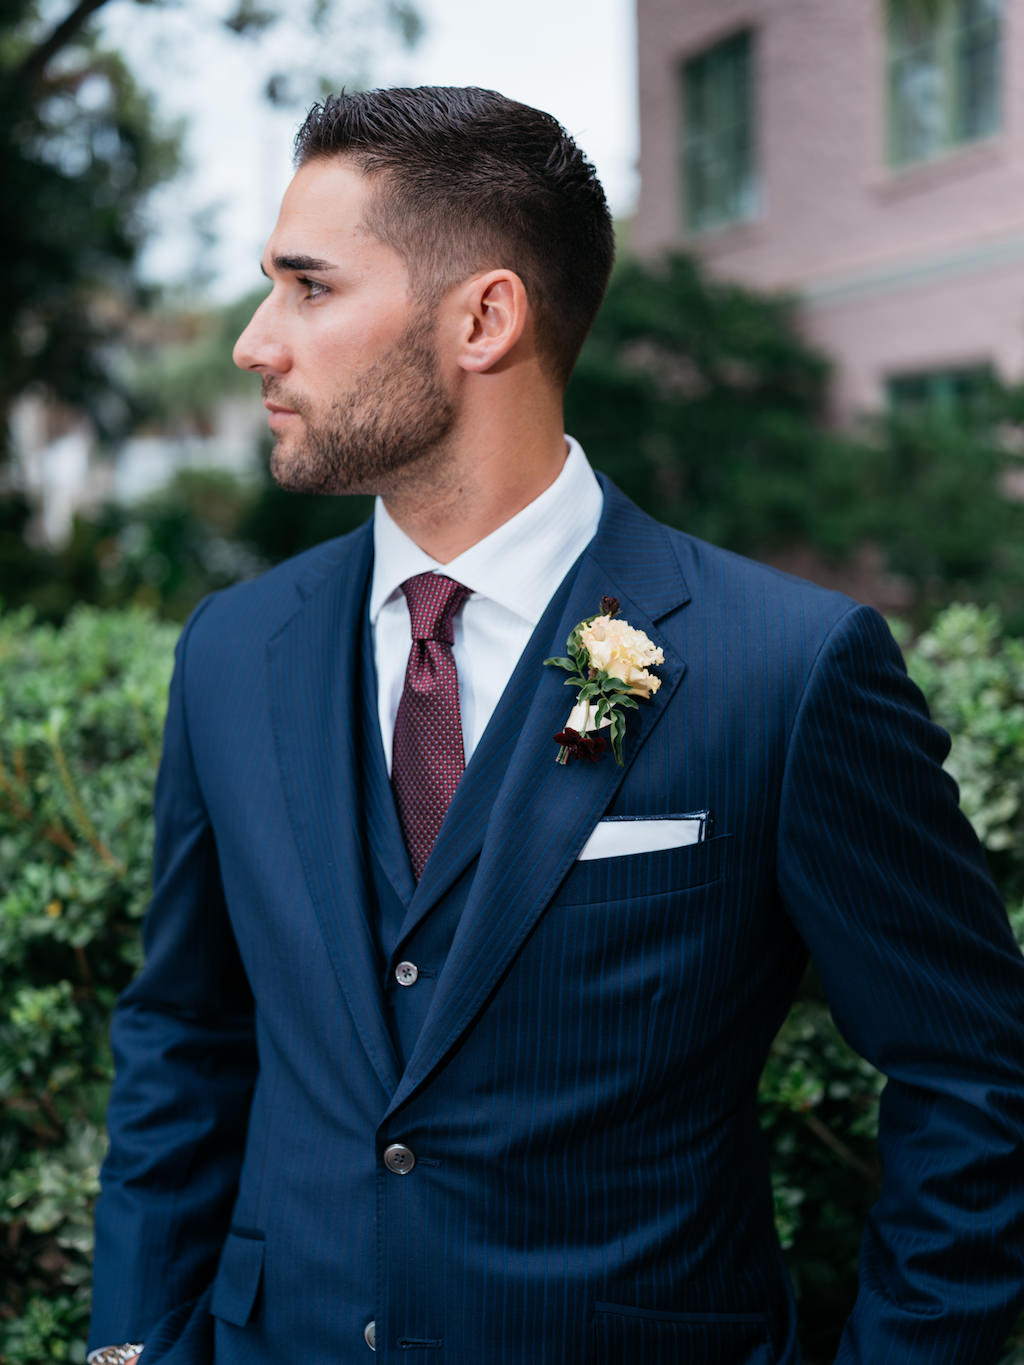 Tampa Bay Rays Professional Baseball Player Kevin Kiermaier Groom Wedding Portrait in Navy Blue Suit, Burgundy Tie, Ivory Floral Boutonniere